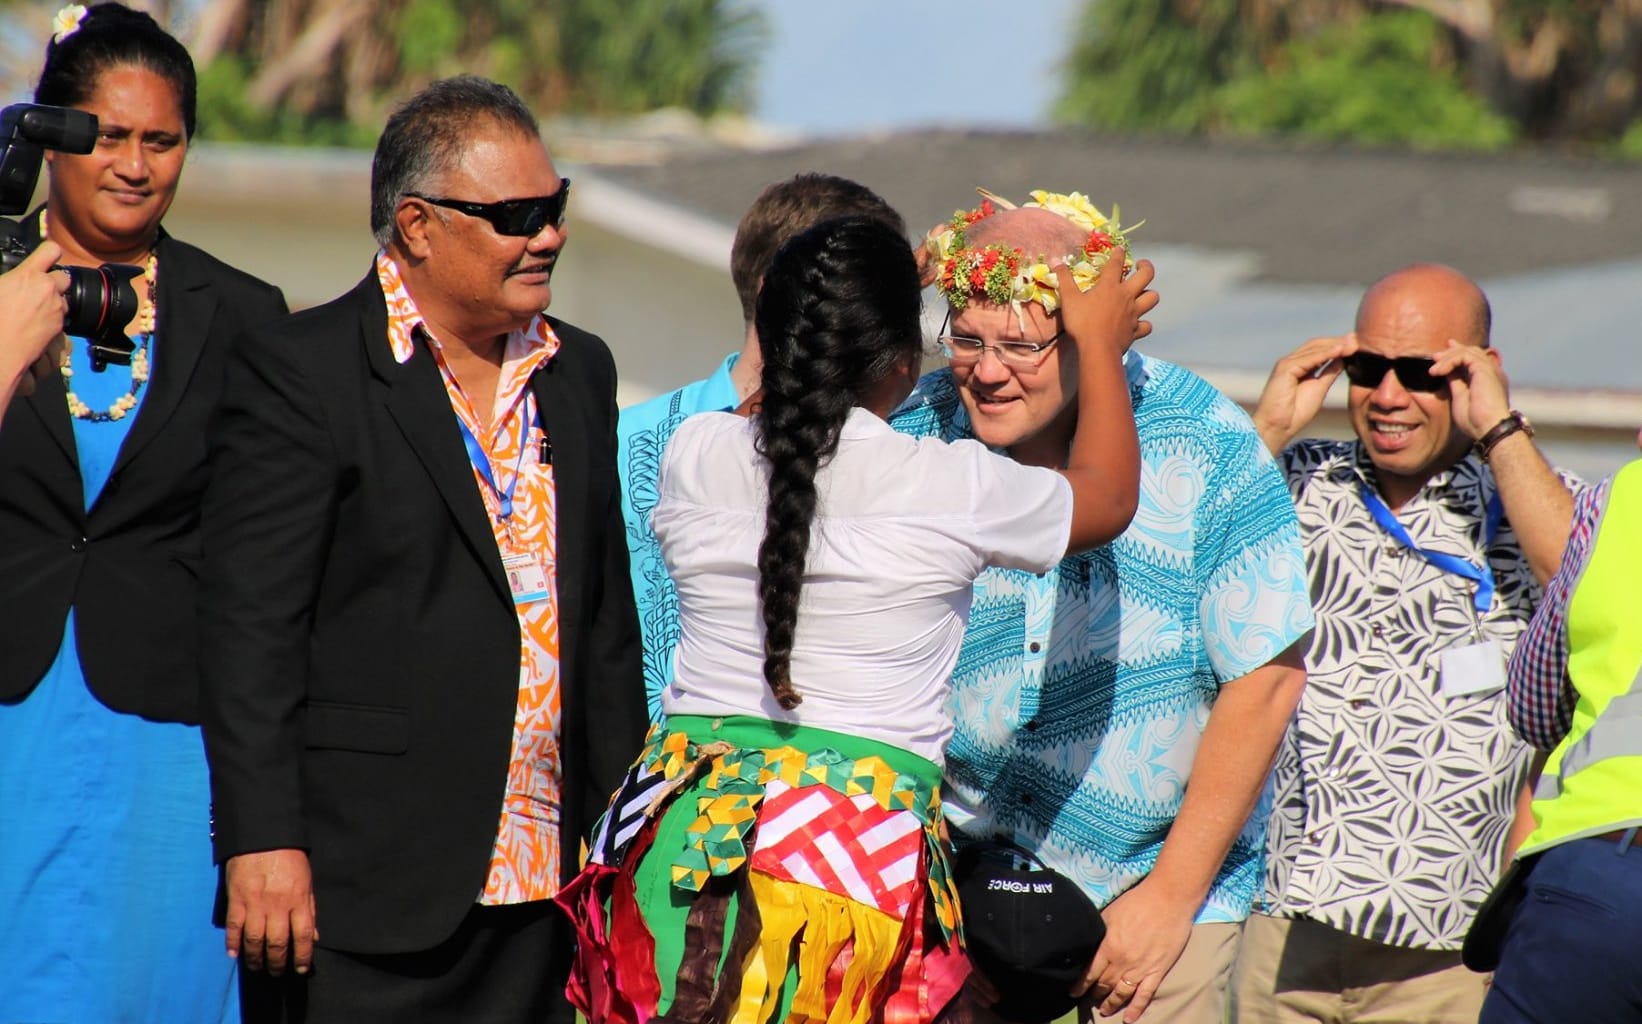 Australia's prime minister is welcomed upon his arrival in Tuvalu for the Pacific Islands Forum leader's summit. August 2019